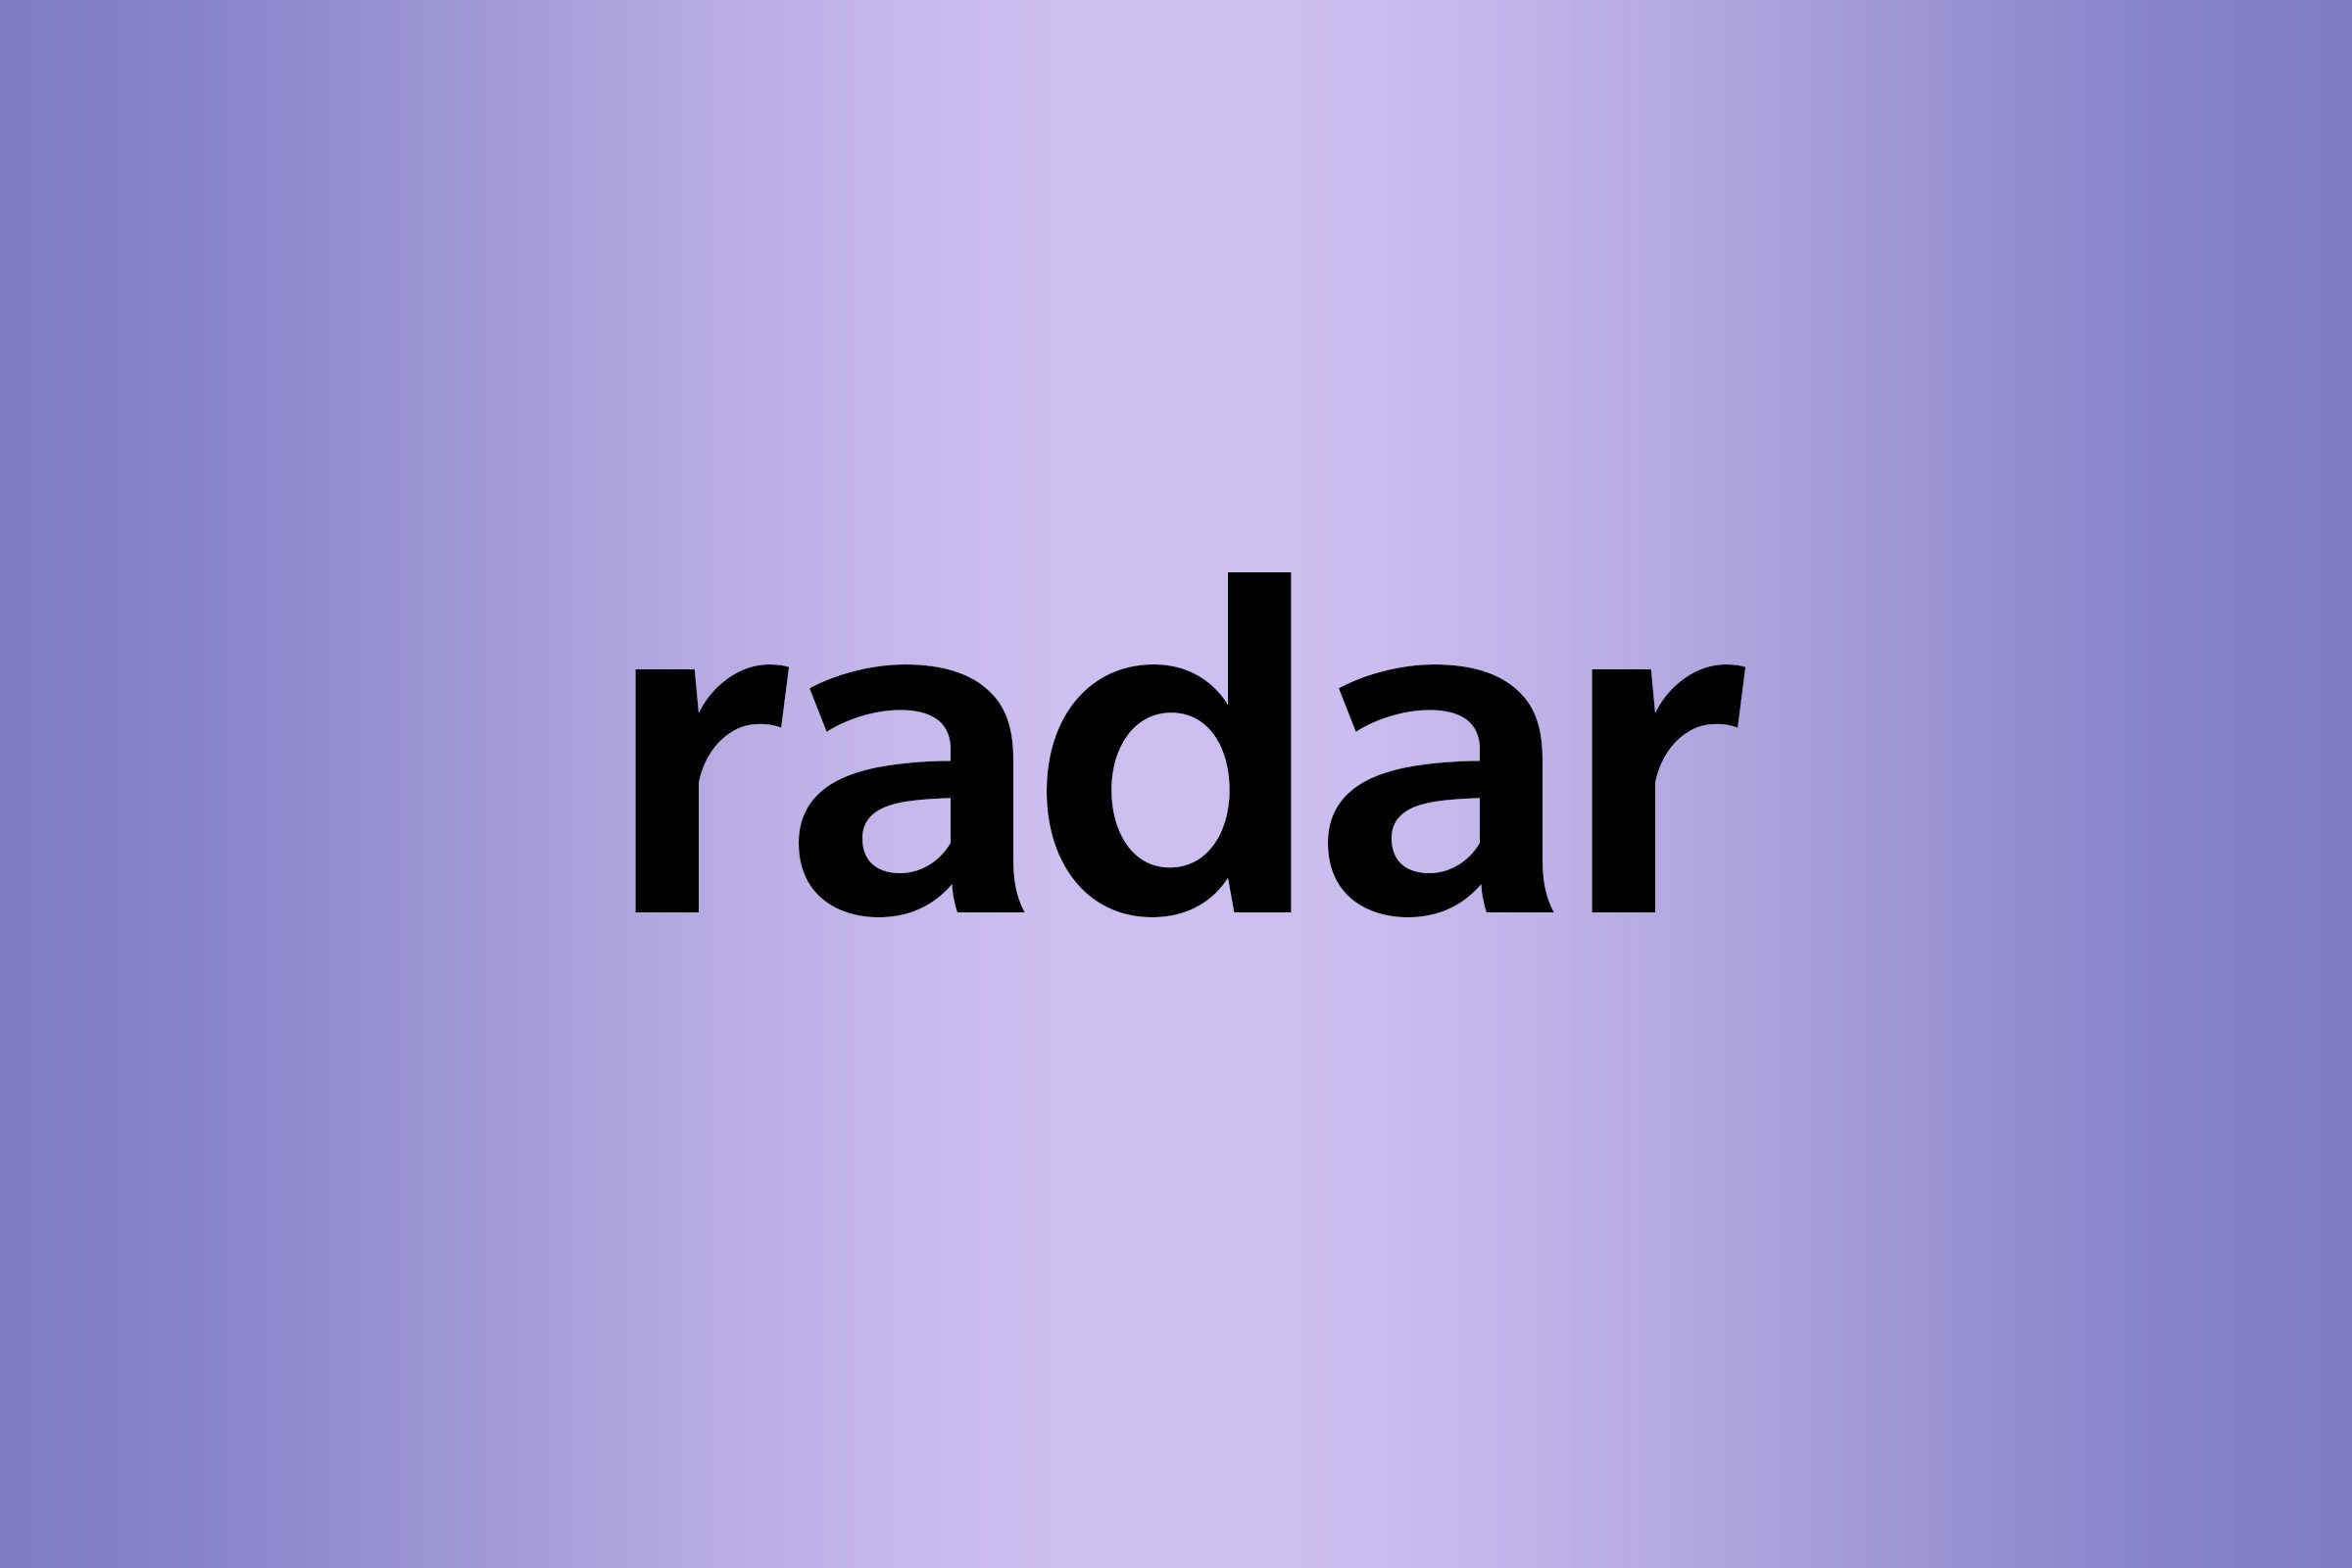 What is a palindrome radar